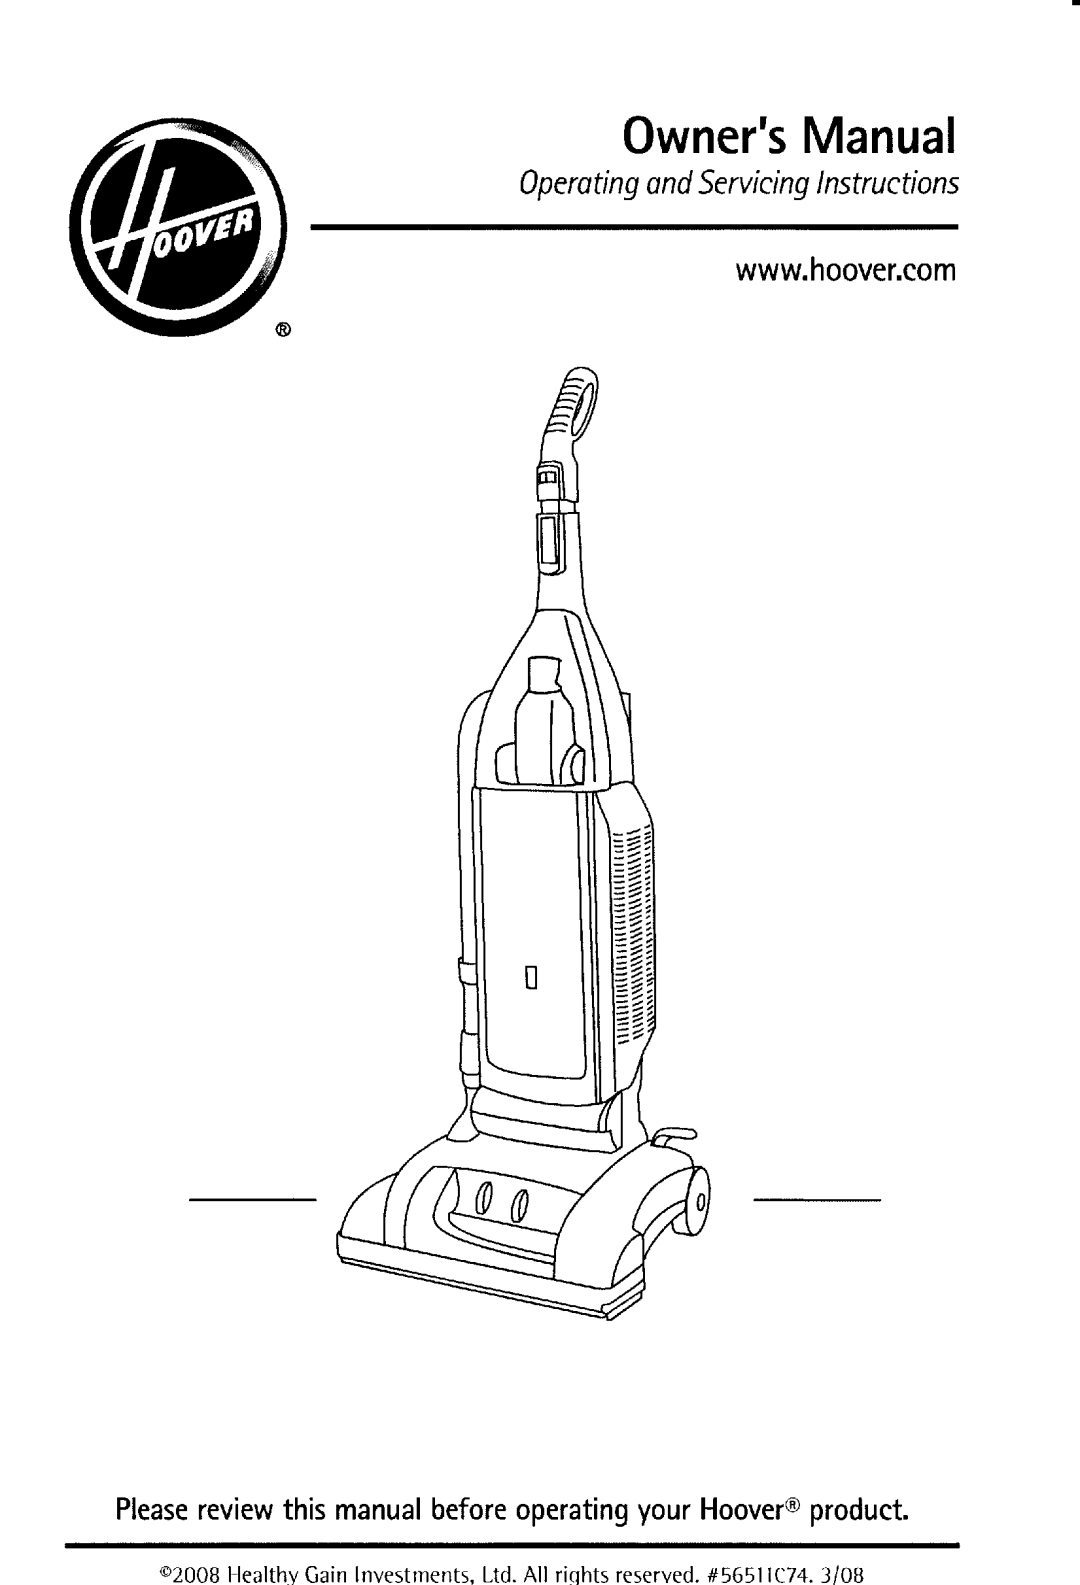 Hoover UH50000 owner manual OwnersManual, = t 